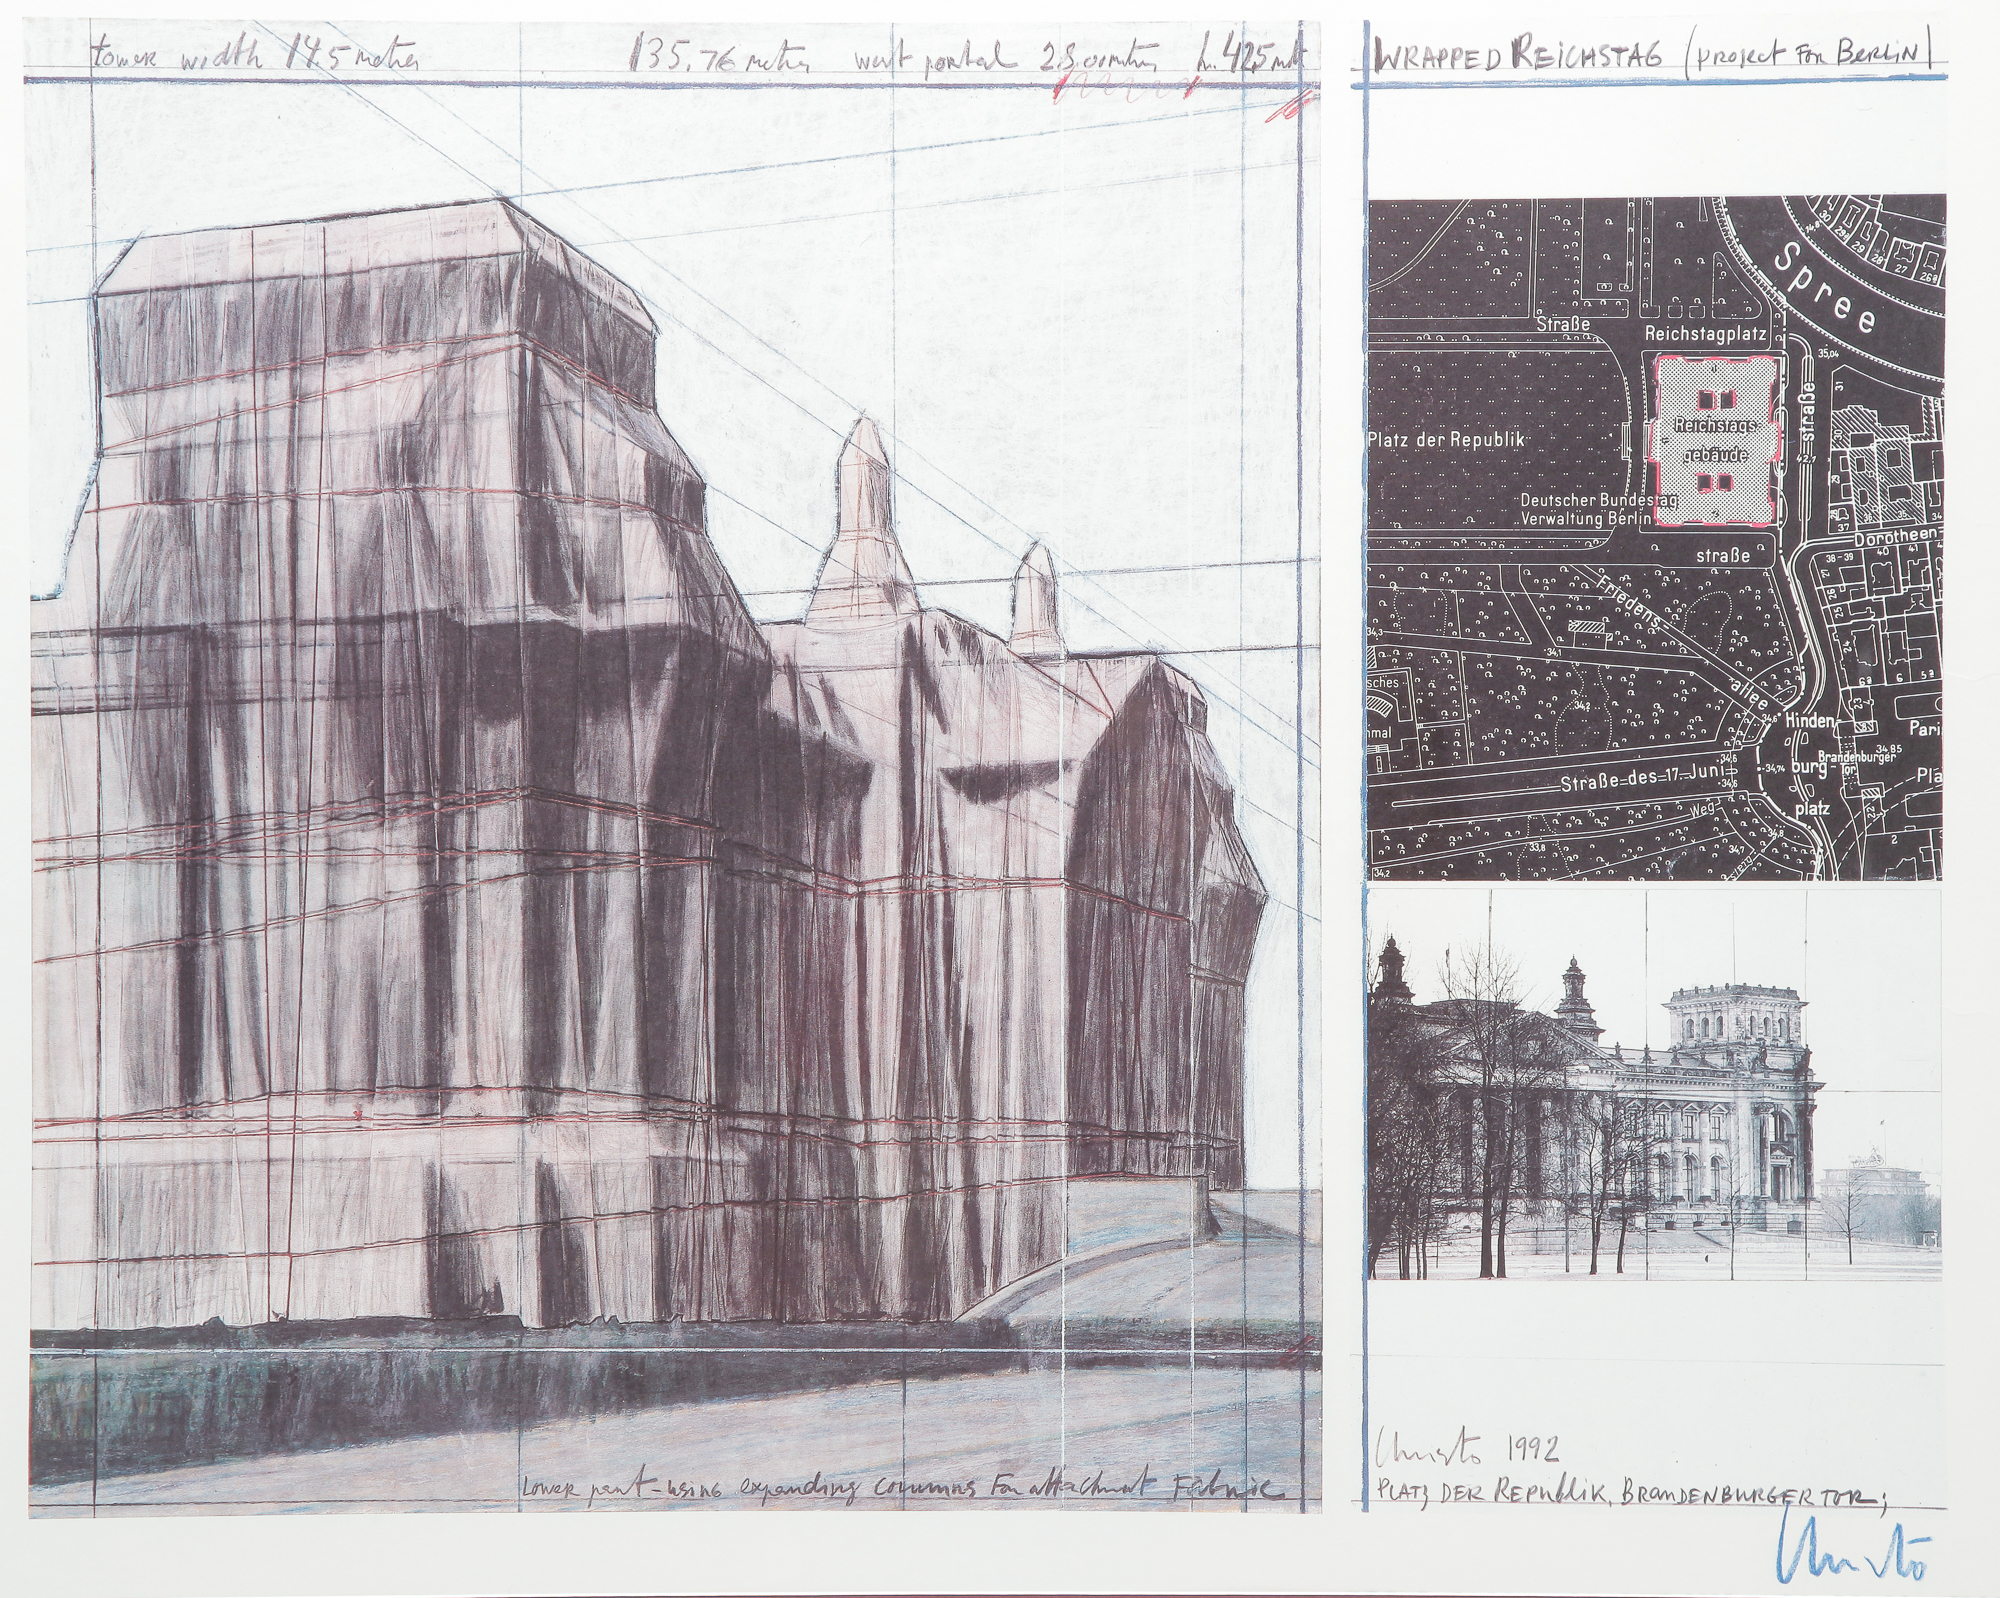 "WRAPPED REICHSTAG" PRINT, CHRISTO.